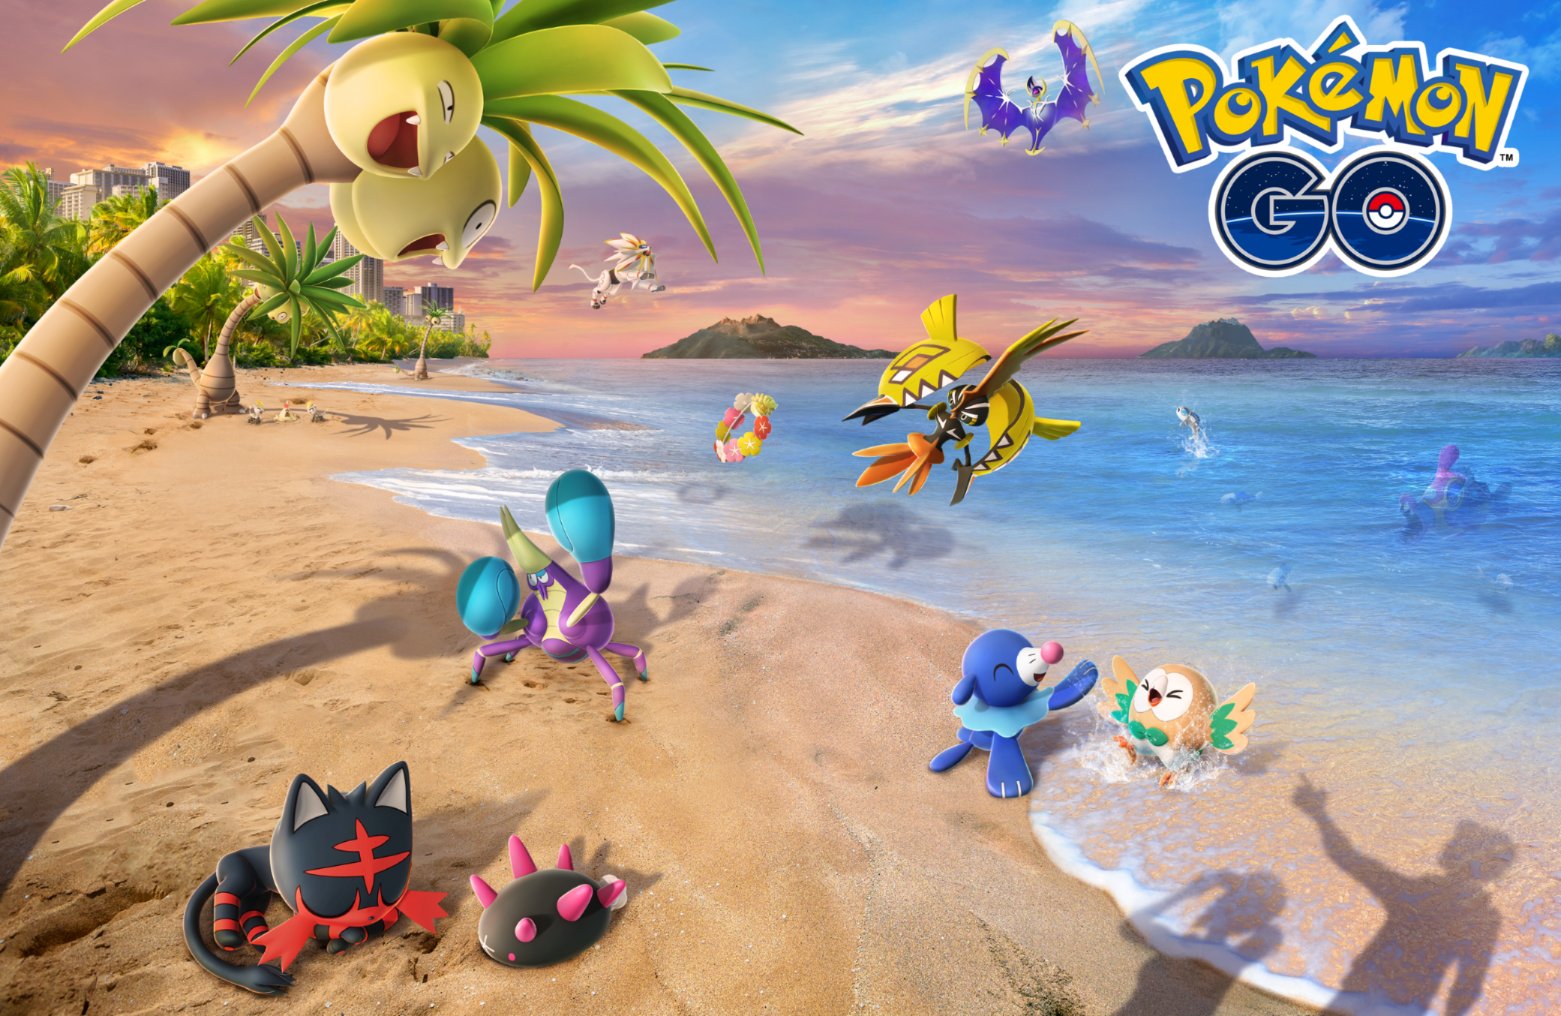 Pokémon GO on Twitter: "🌴 Alola, Trainers! More Pokémon originally discovered in the Alola region have started appearing in the world of Pokémon GO! 🌴 We can only guess what kinds of